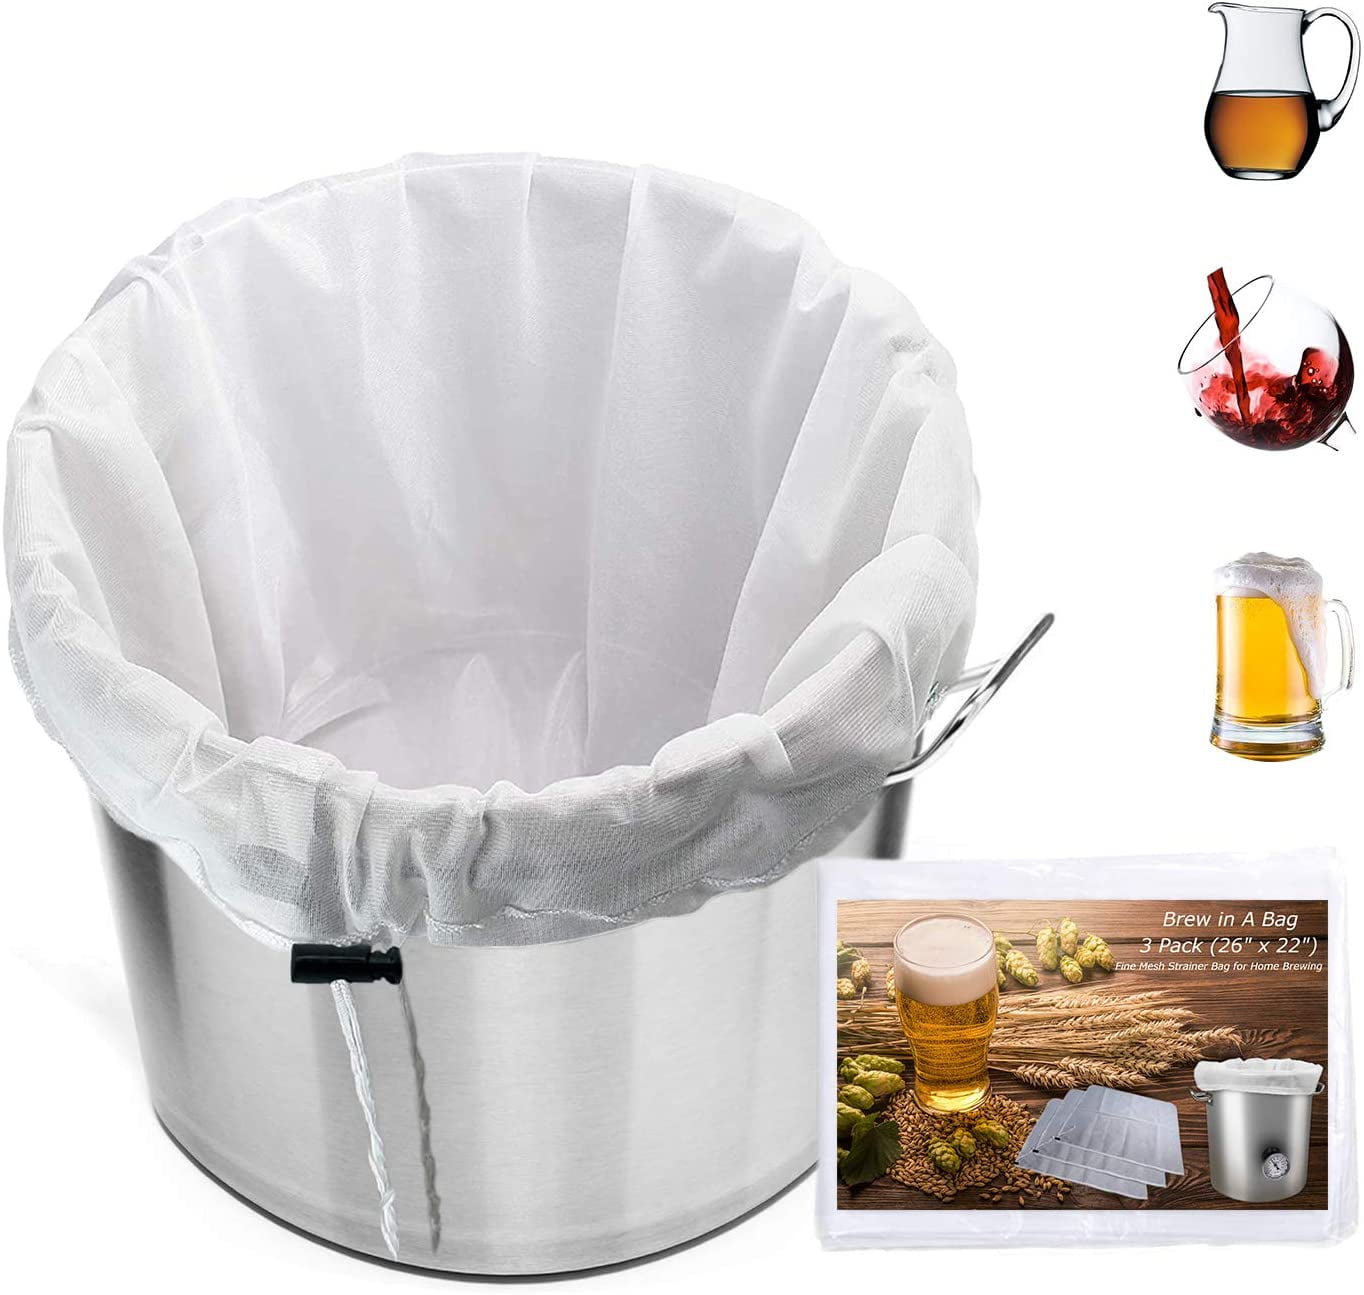 4 Pieces Brew Bag Reusable Fine Mesh Bag Large Straining Mesh Bag with Drawstring for Fruit Cider Apple Grape Wine Press Brew in a Bag 26 x 22 Inch 